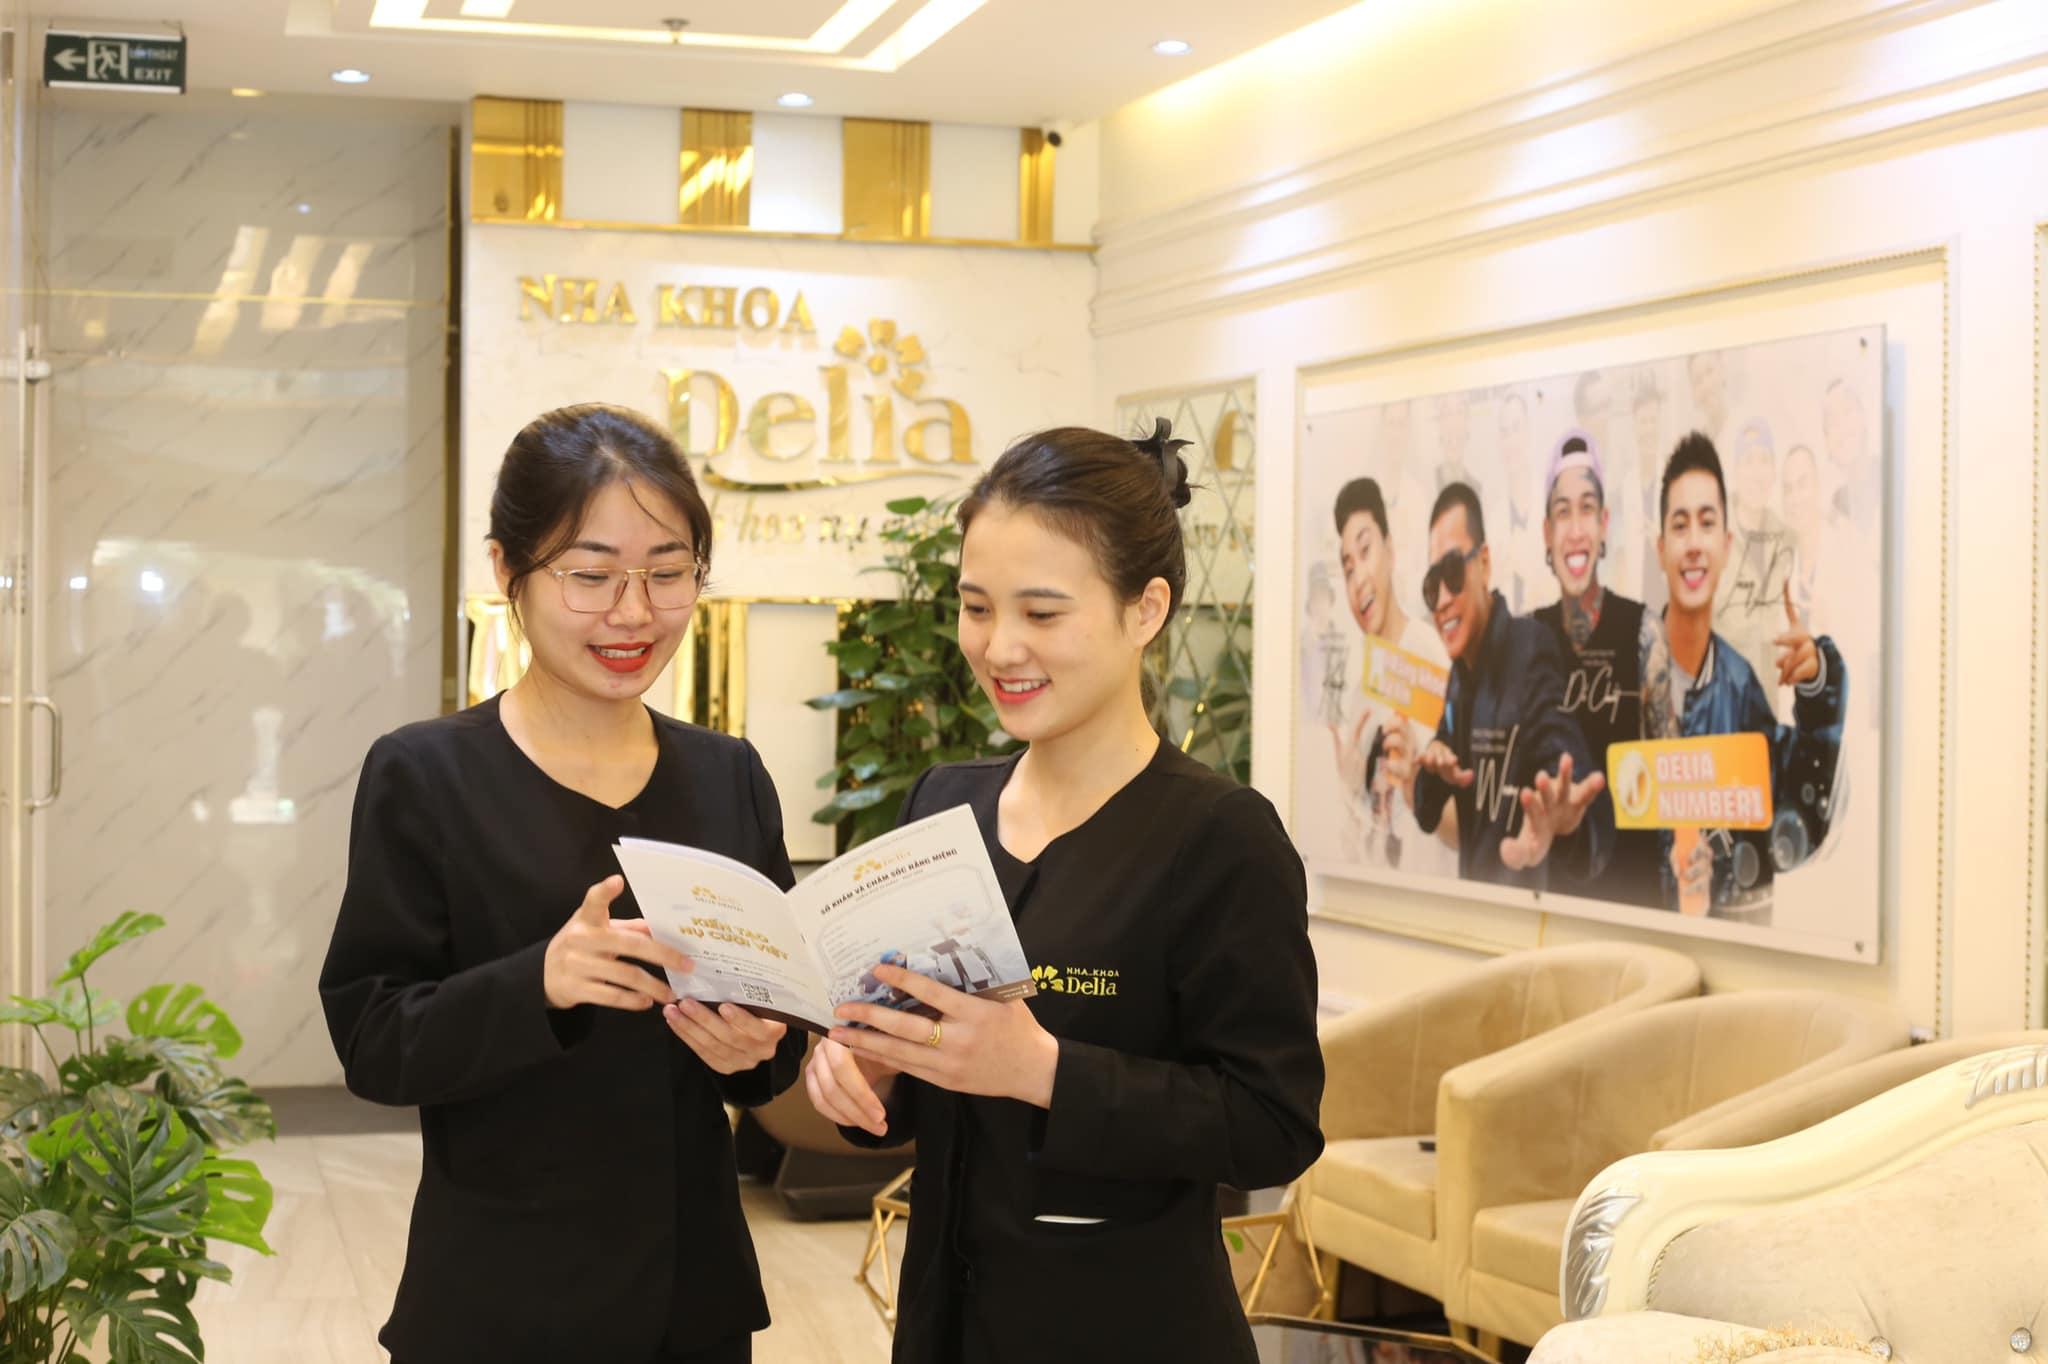 Latest Công Ty Cổ Phần Delia Beauty employment/hiring with high salary & attractive benefits